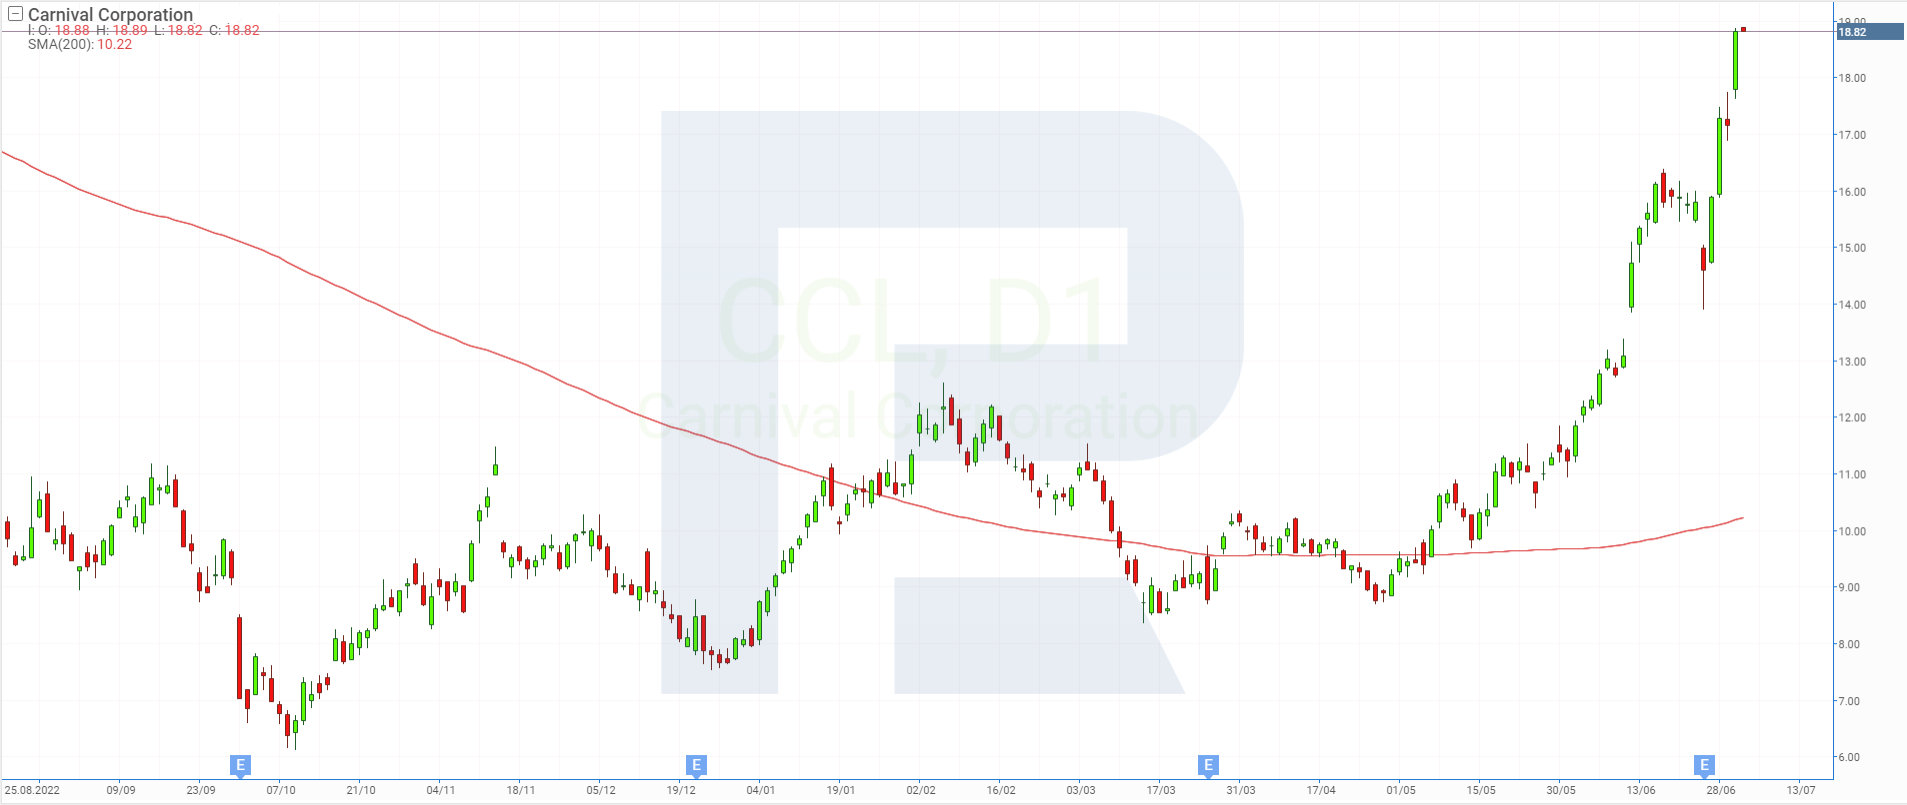 Stock chart of Carnival Corporation